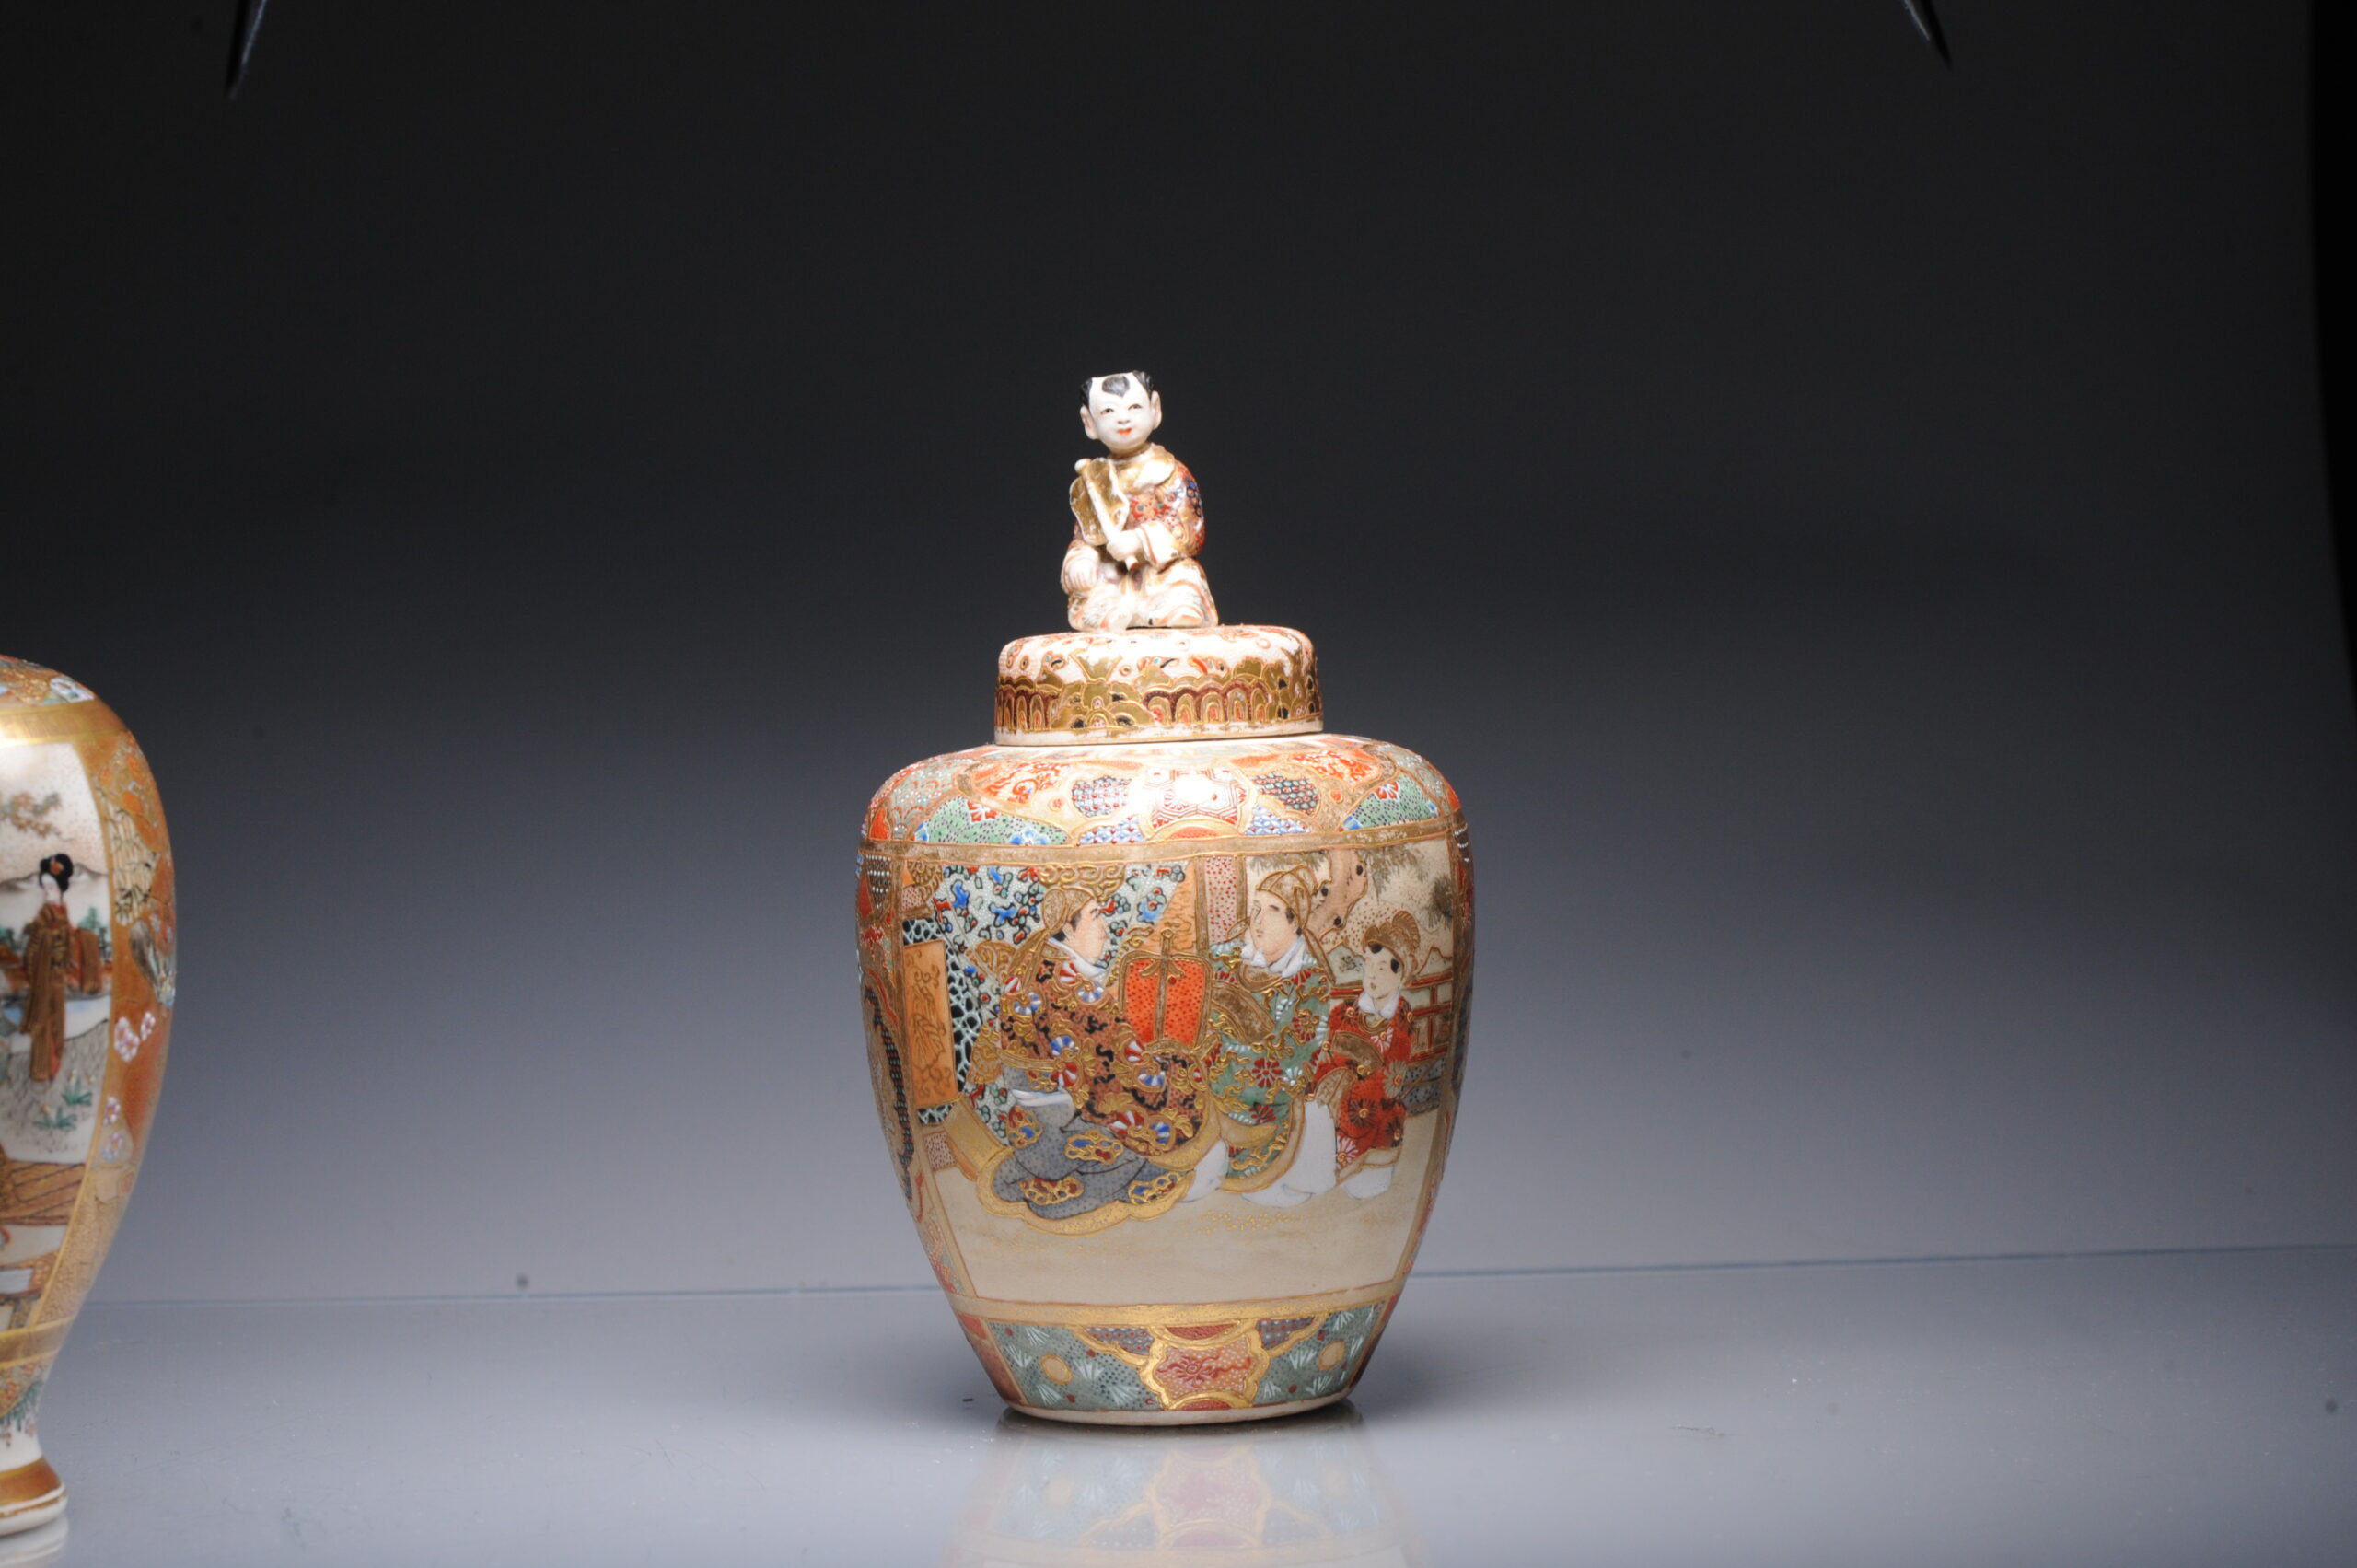 Antique ca 1900 Japanese Satsuma Jar With Figures Richly Decorated Unmarked